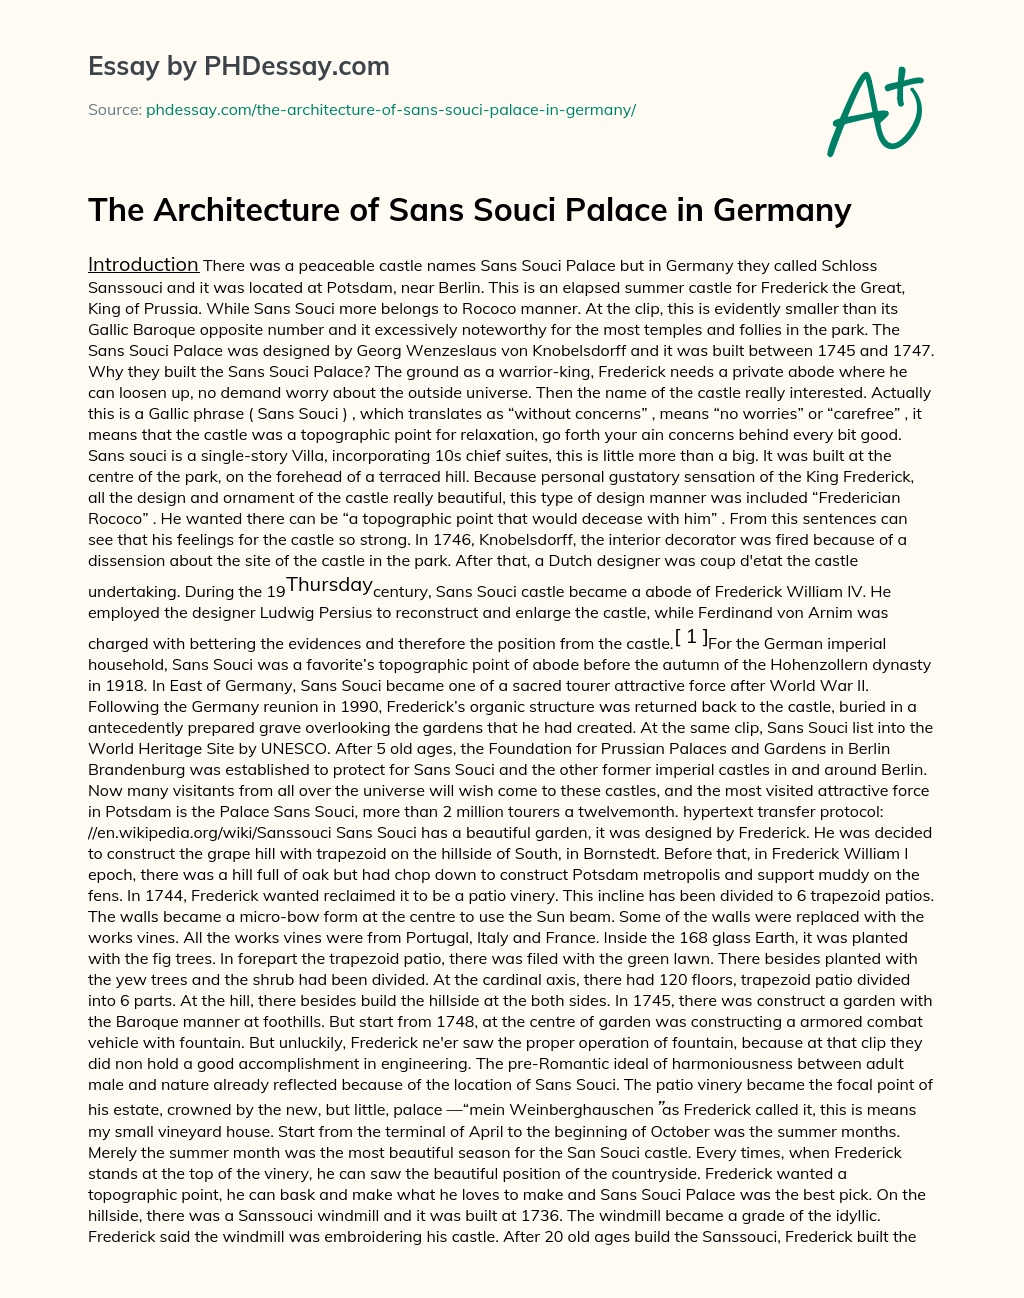 The Architecture of Sans Souci Palace in Germany essay